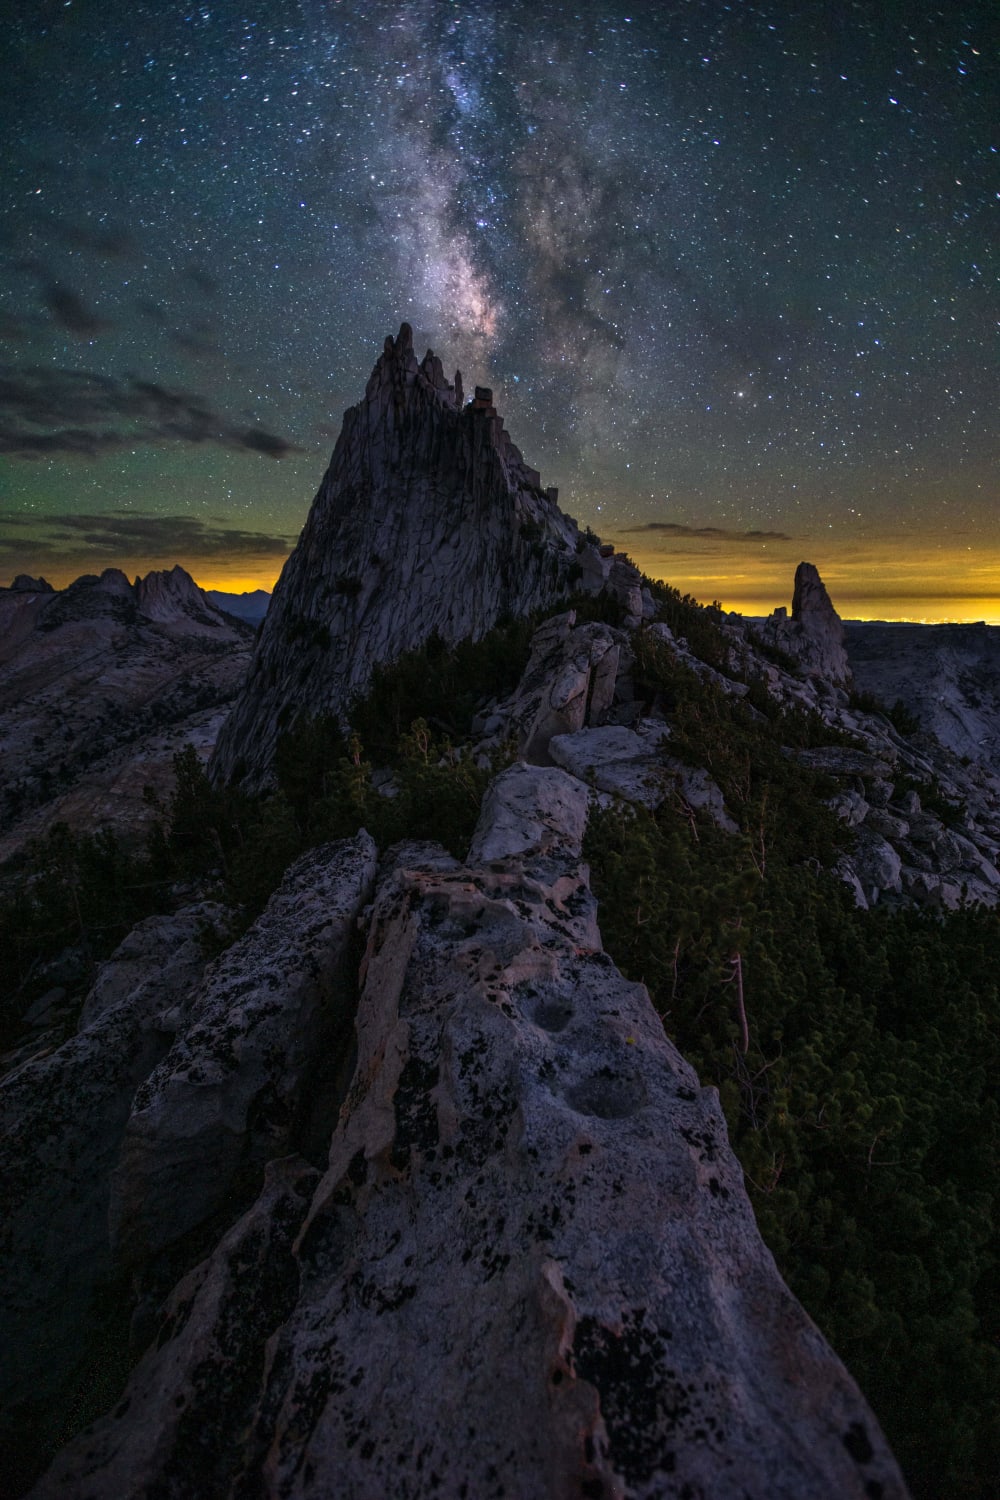 I tried to capture this last year but smoke from nearby fires blocked the entire vista. When July rolled around this year I knew exactly where I would be. Milky Way gleaming over Cathedral Peak, Yosemite National Park